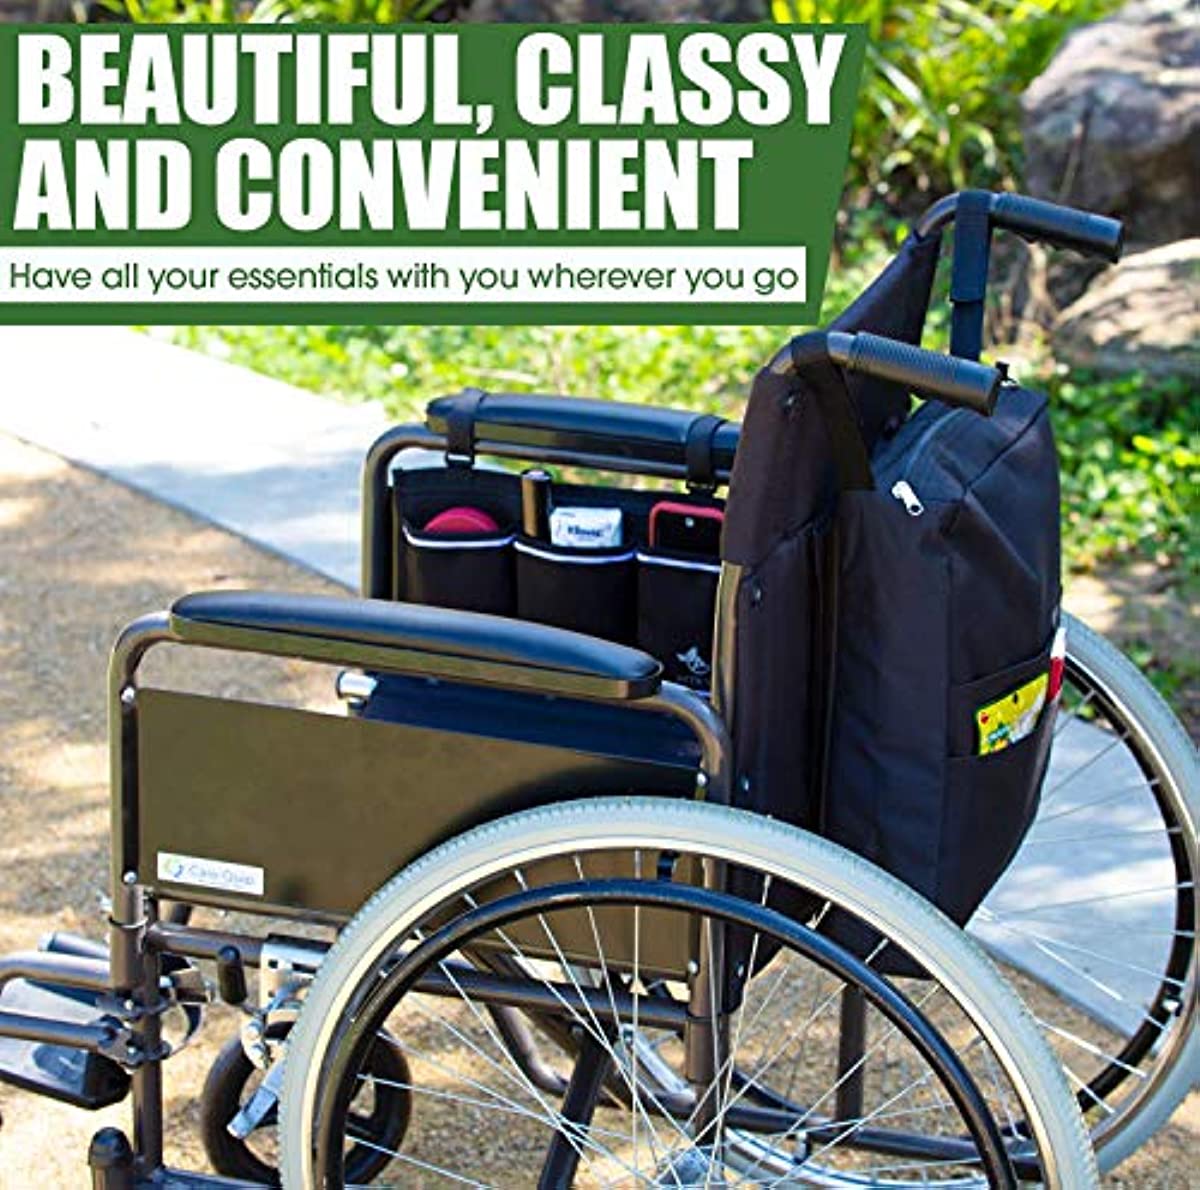 Wheelchair Side Bag - Arm Rest Pouch - Wheel Chair Accessories Organizers - Fits Walkers, Rollators, Scooters (Black)